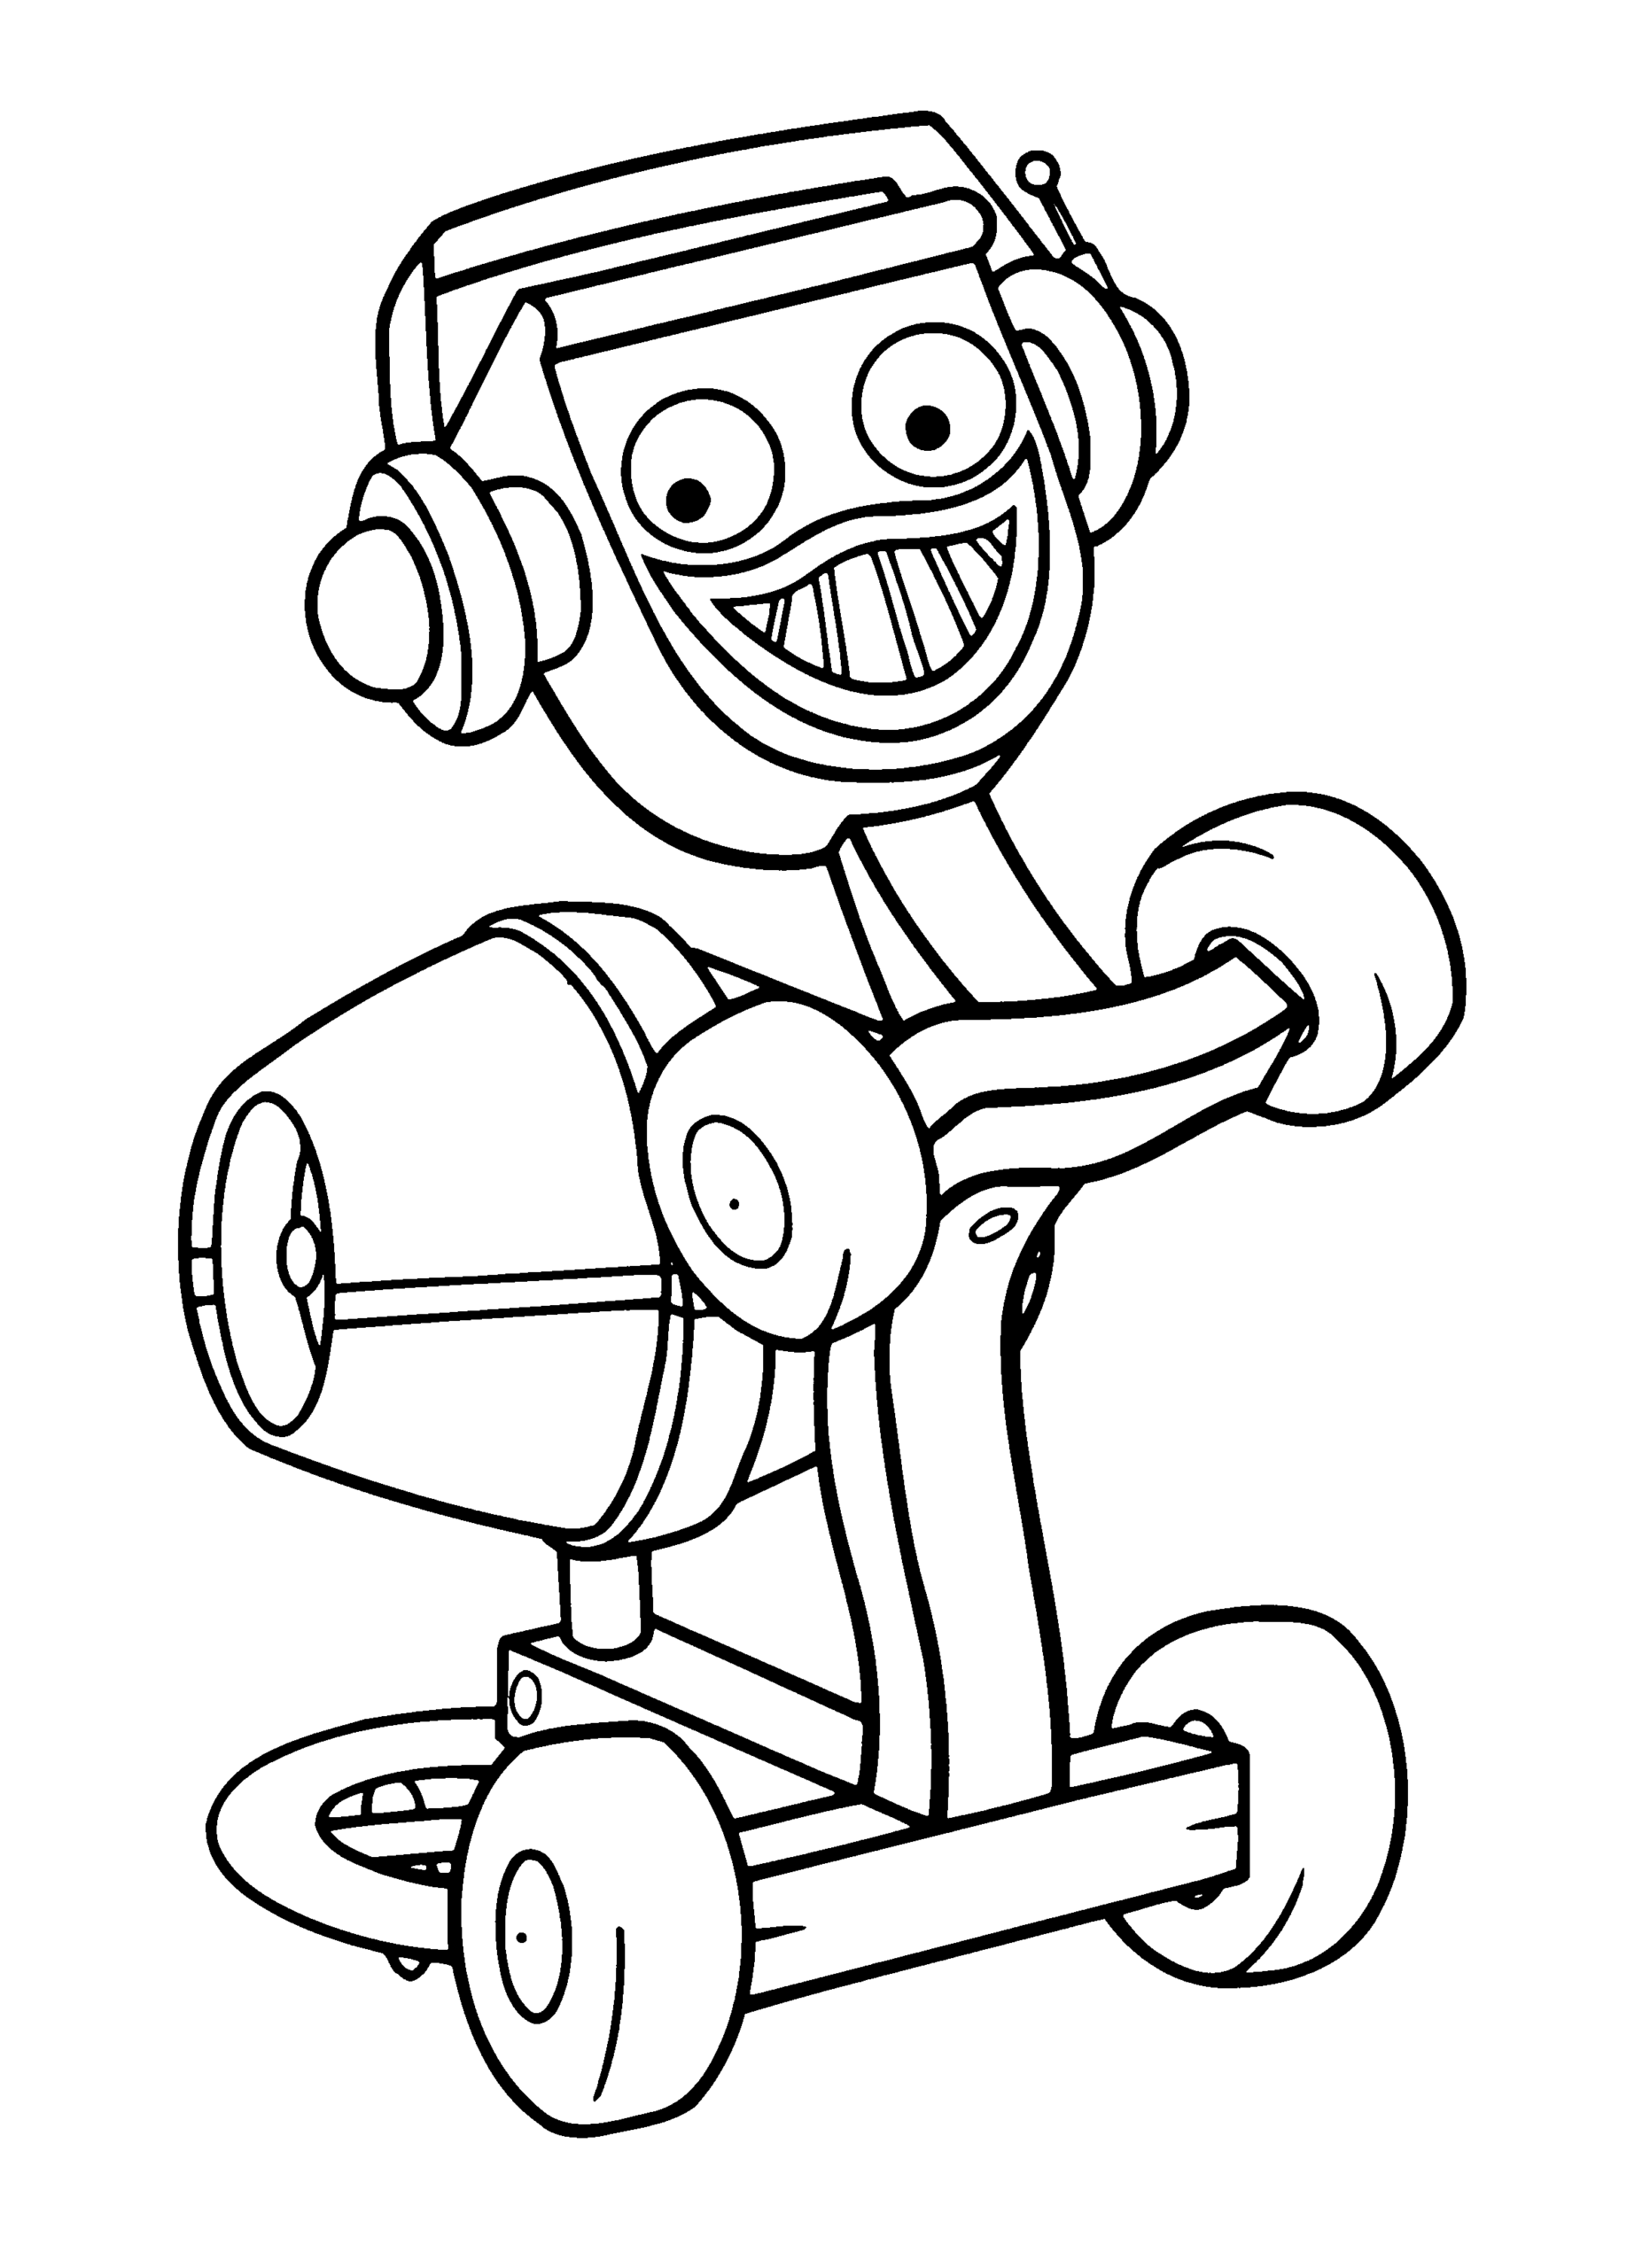 Bob the Builder Coloring Pages TV Film bob der baumeister Printable 2020 00941 Coloring4free